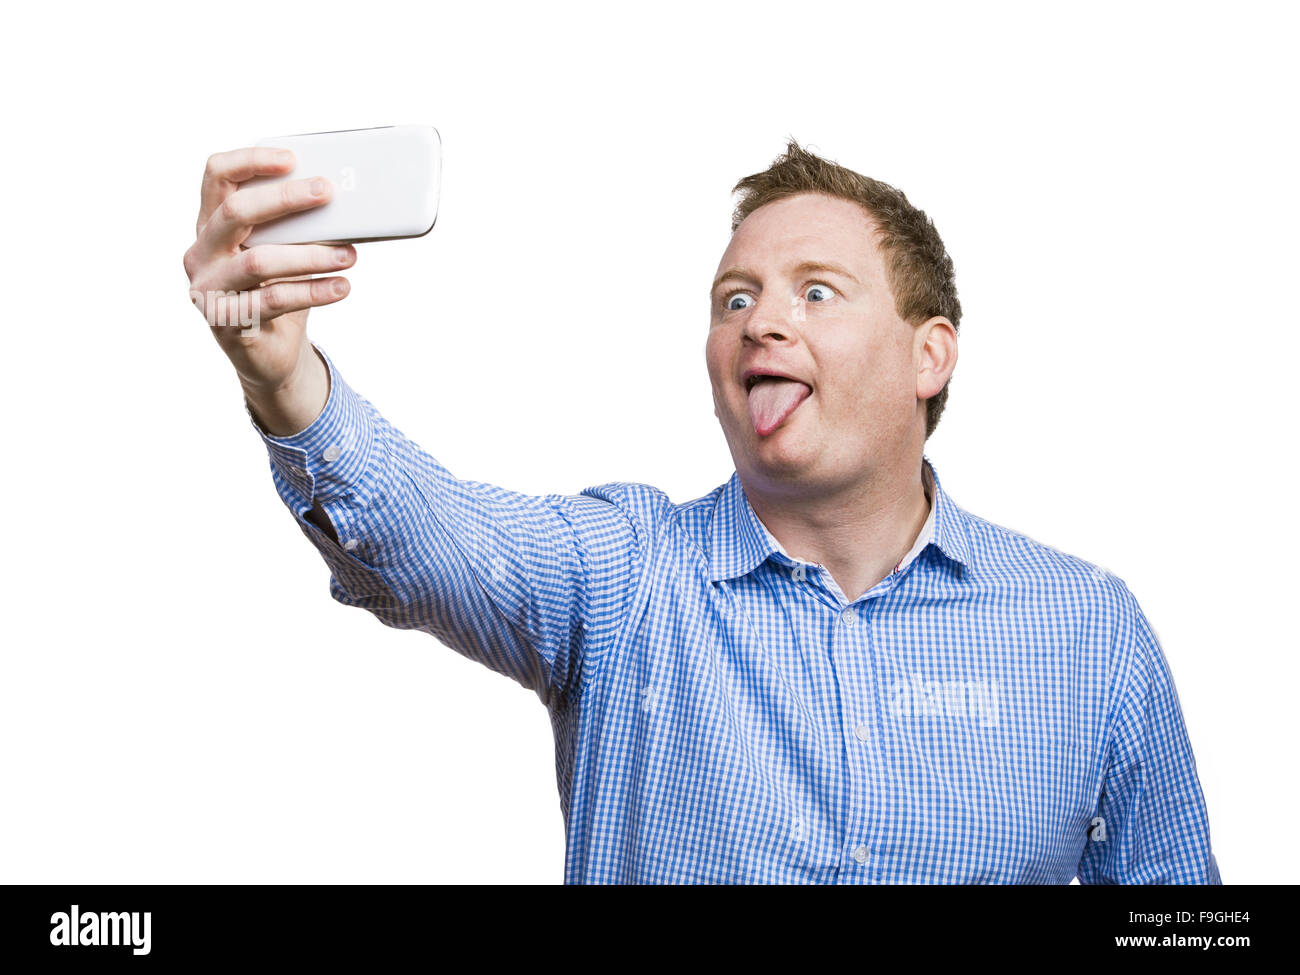 Man making funny faces while taking selfie of himself. Studio shot on white background. Stock Photo